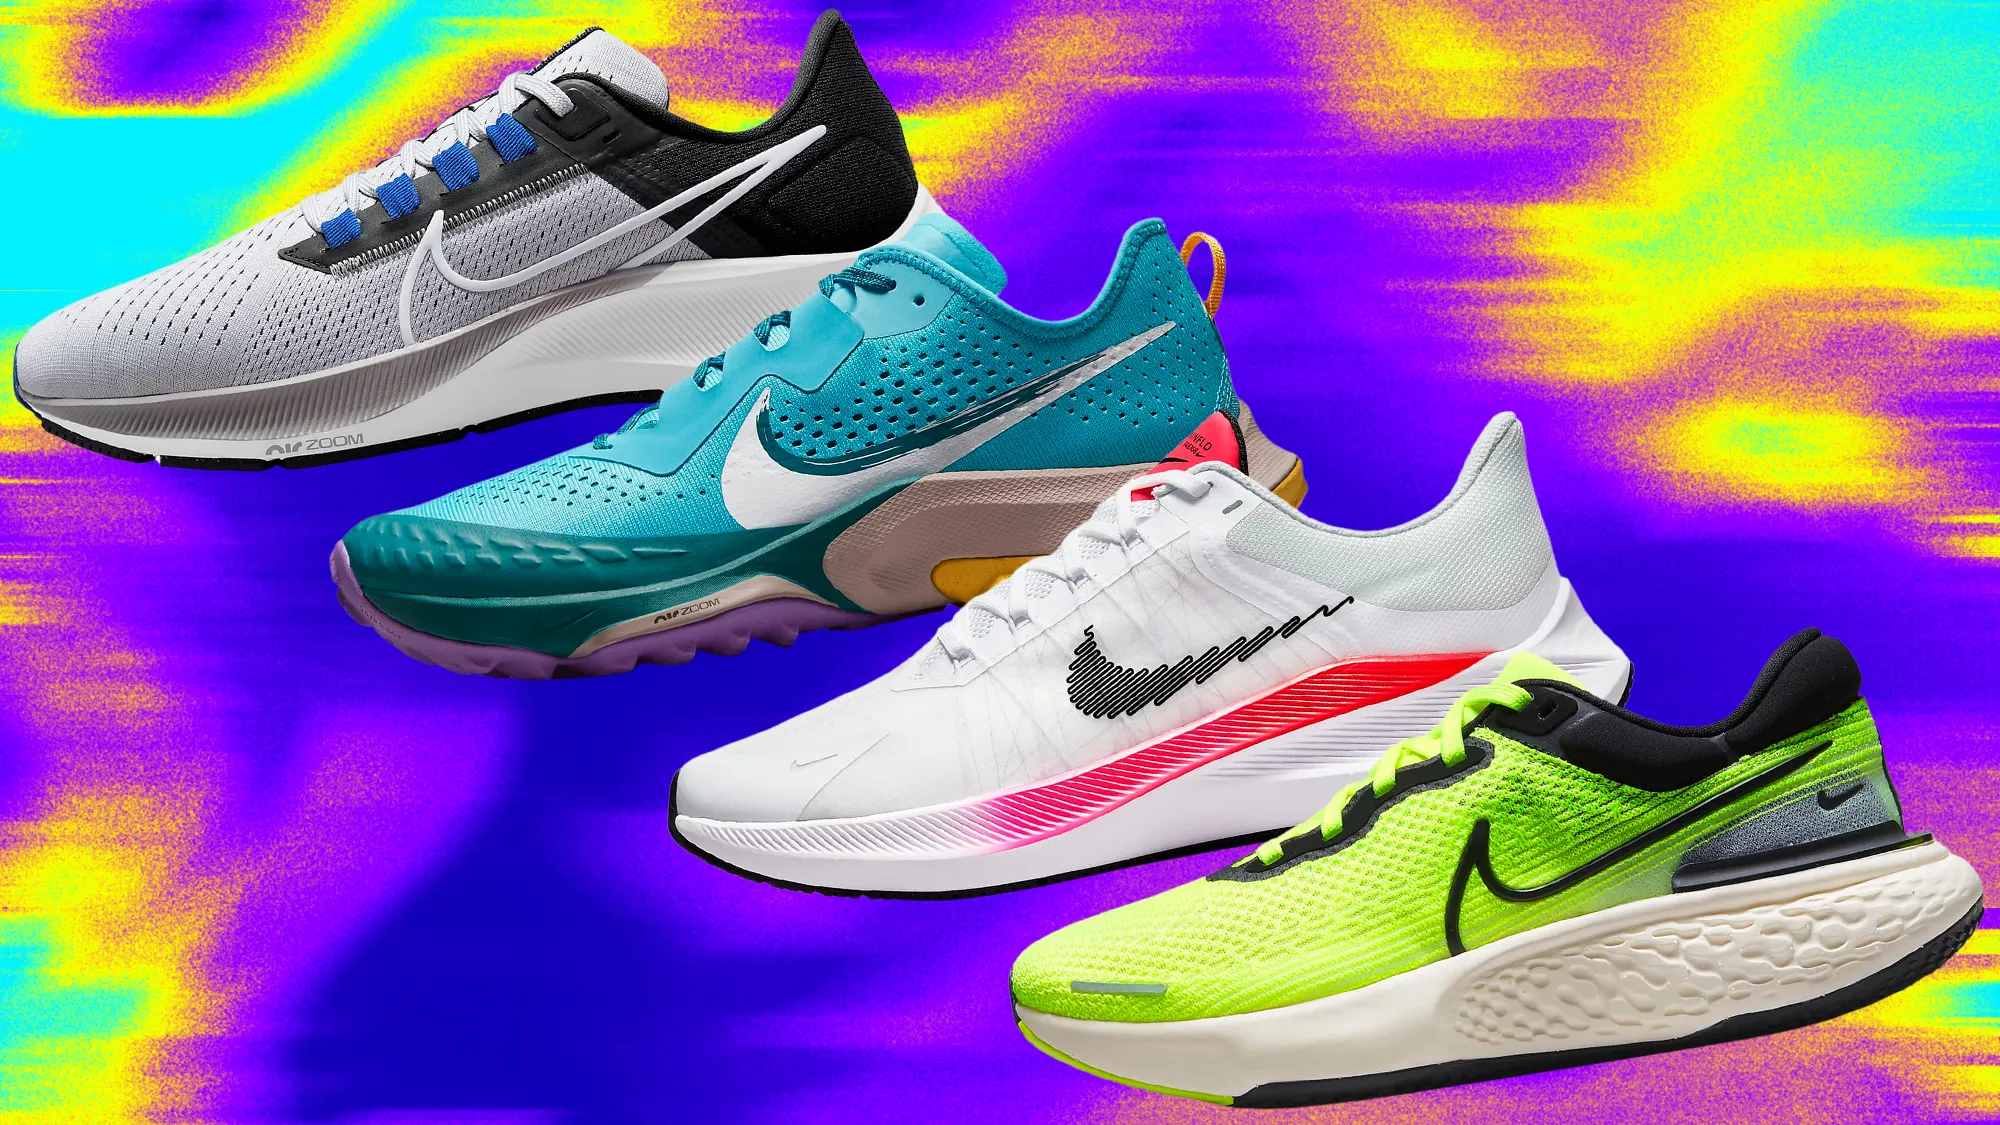 What Is The Best Site For Buying Sports Shoes And Apparel